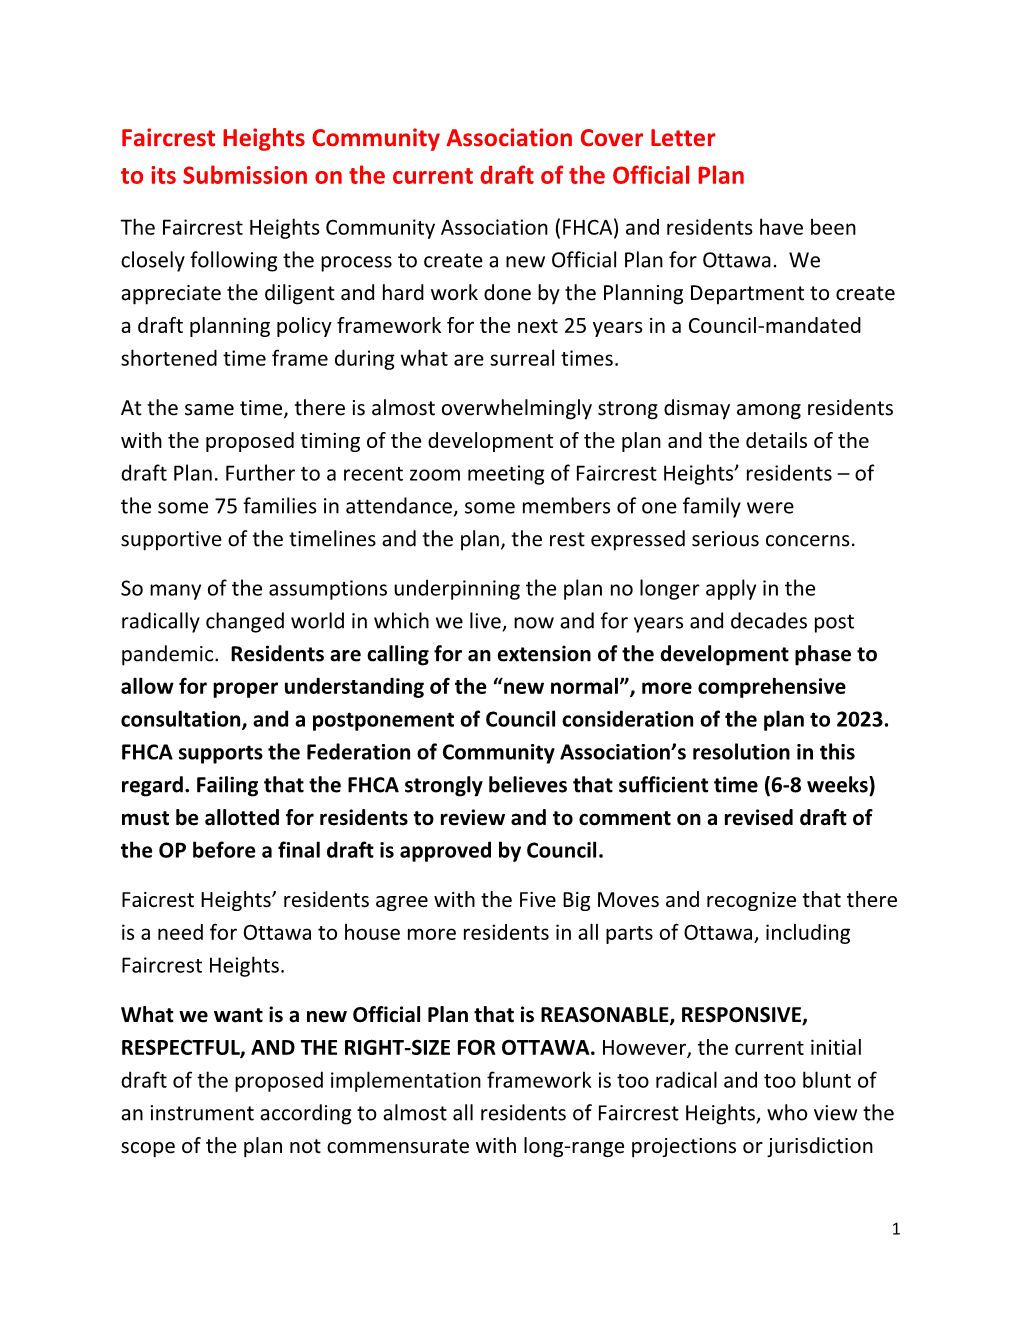 Faircrest Heights Community Association Cover Letter to Its Submission on the Current Draft of the Official Plan